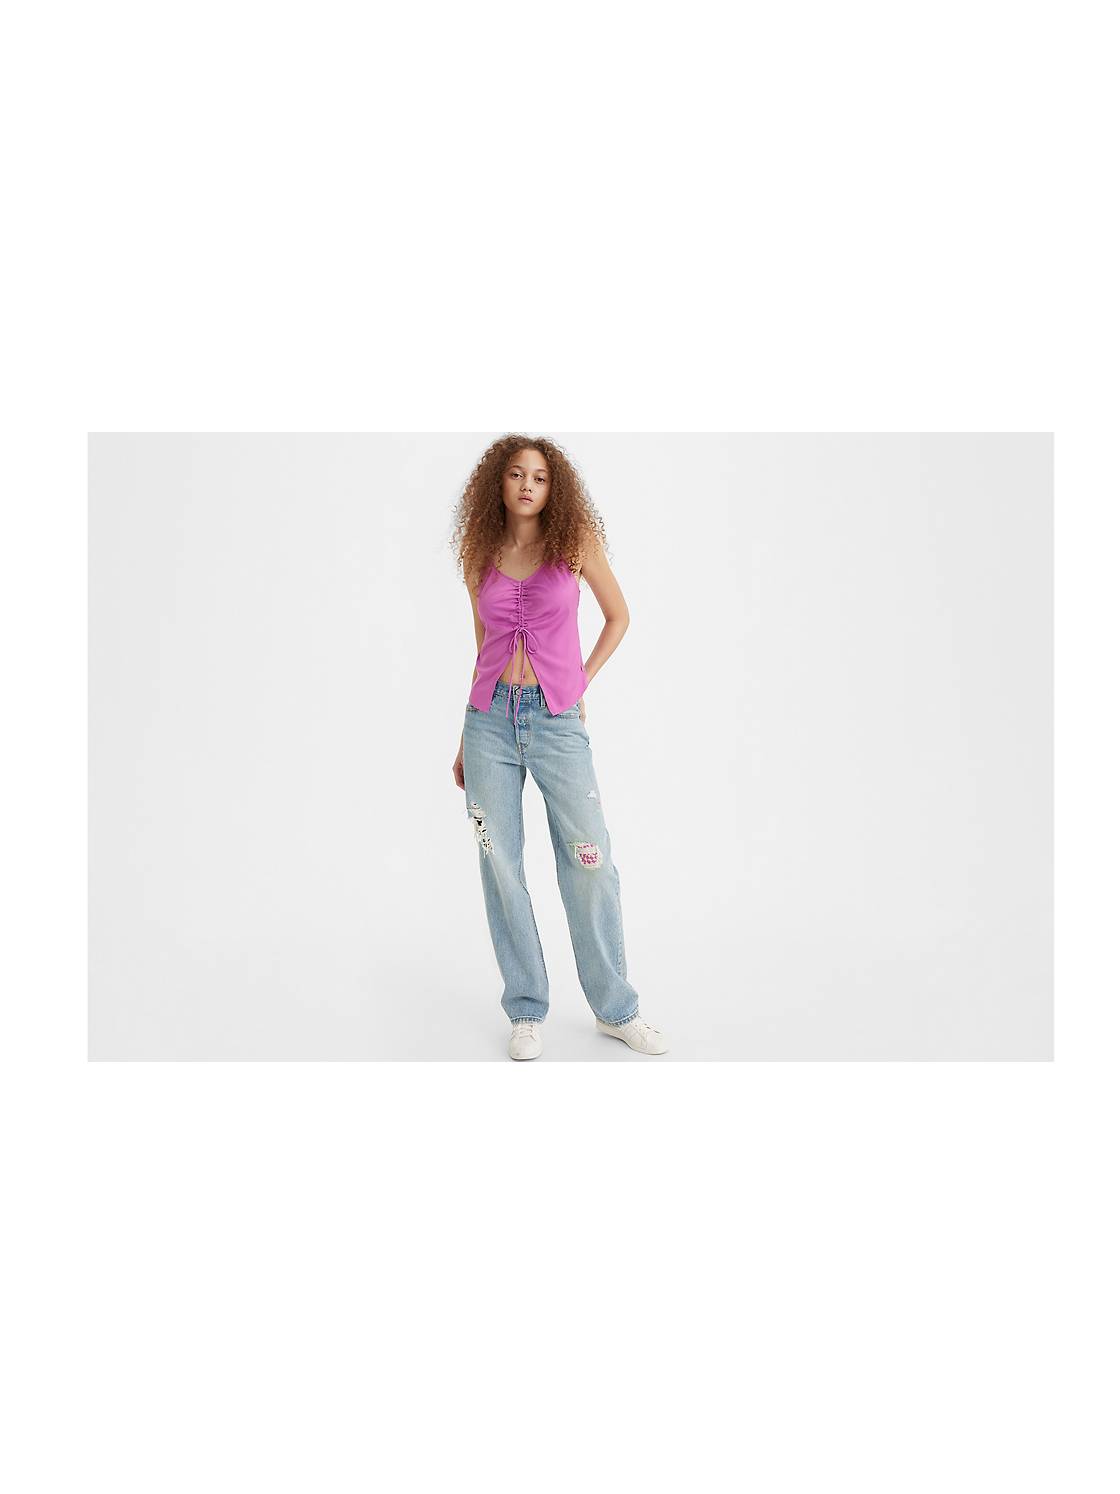 Women's Clothing for Sale - Sale on Clothing for Women | Levi's® CA